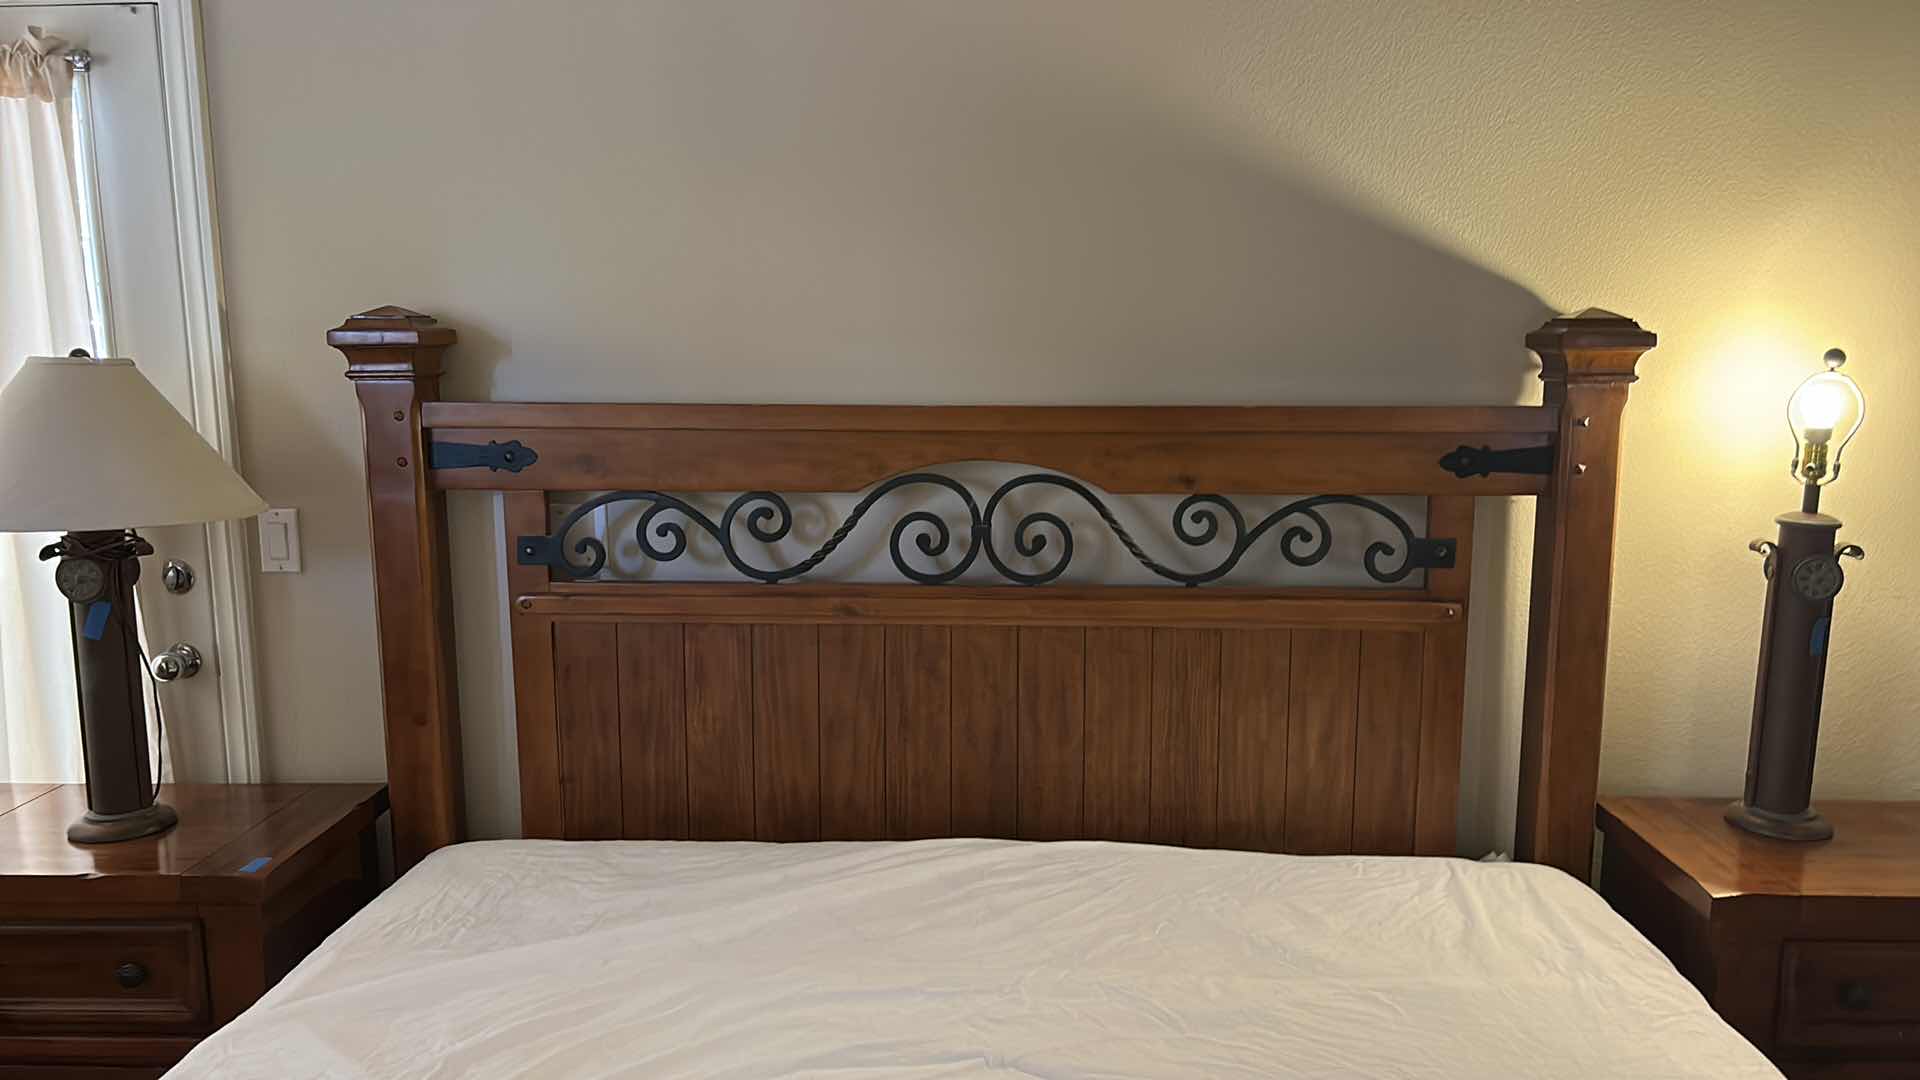 Photo 5 of HOME FURNITURE - WOOD WITH METAL ACCENTS - KING BEDFRAME HEADBOARD AND FOOTBOARD 82. 5” x 90” x H61” (MATTRESS AND OTHER PIECES SOLD SEPERATELY)